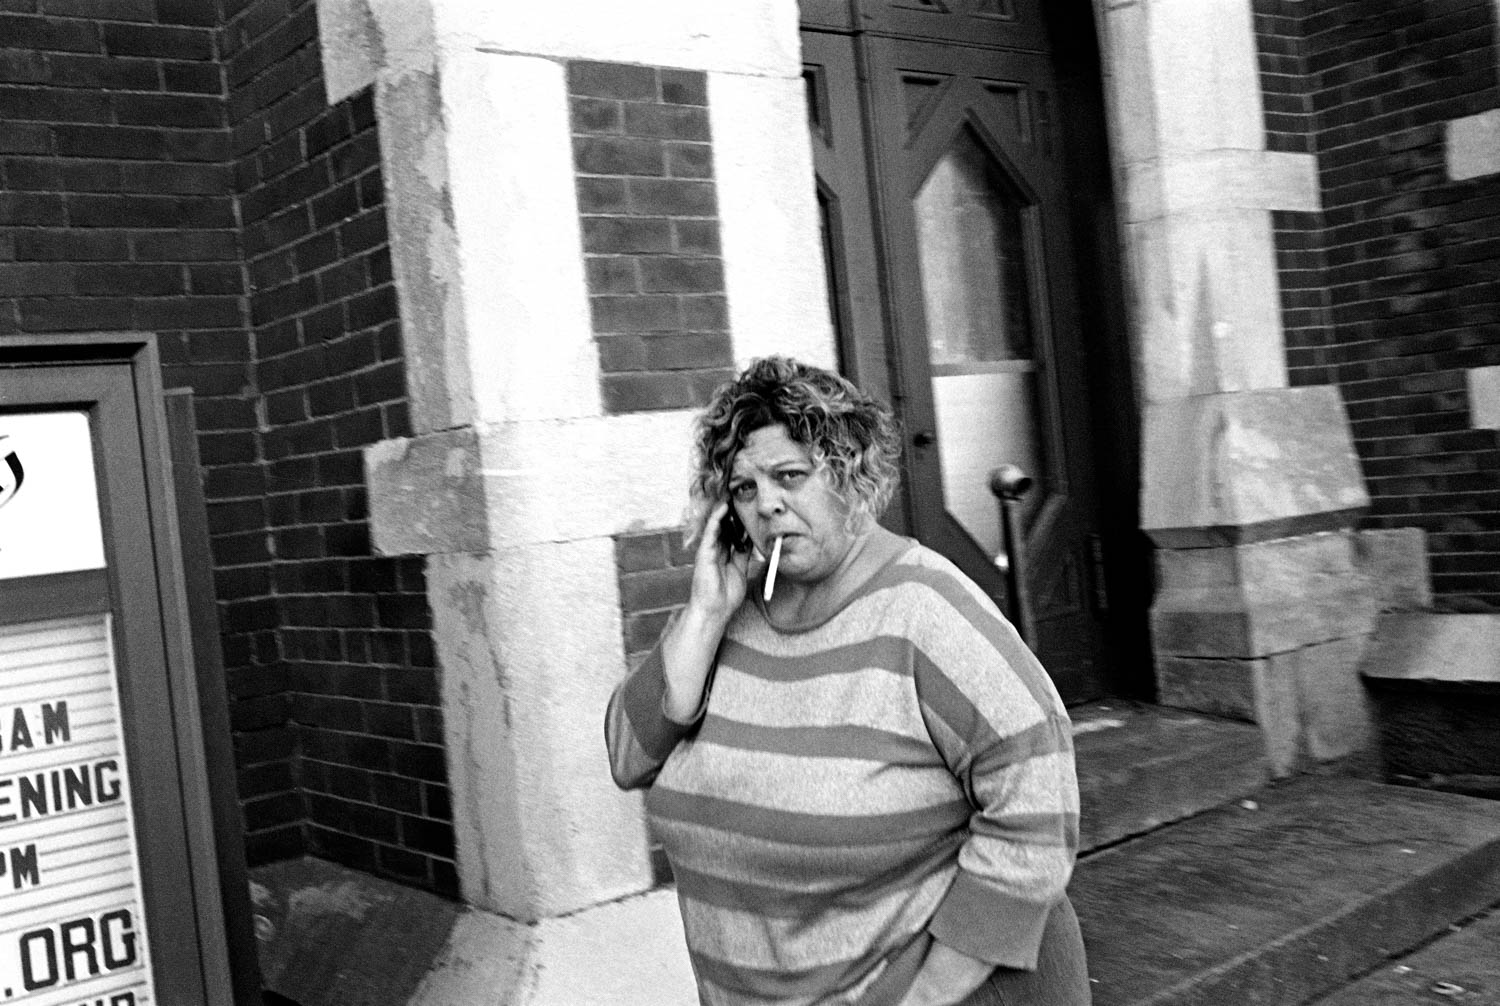 A black and white street photography of a woman talking on her cell phone and smoking on the streets of Binghamton, NY.